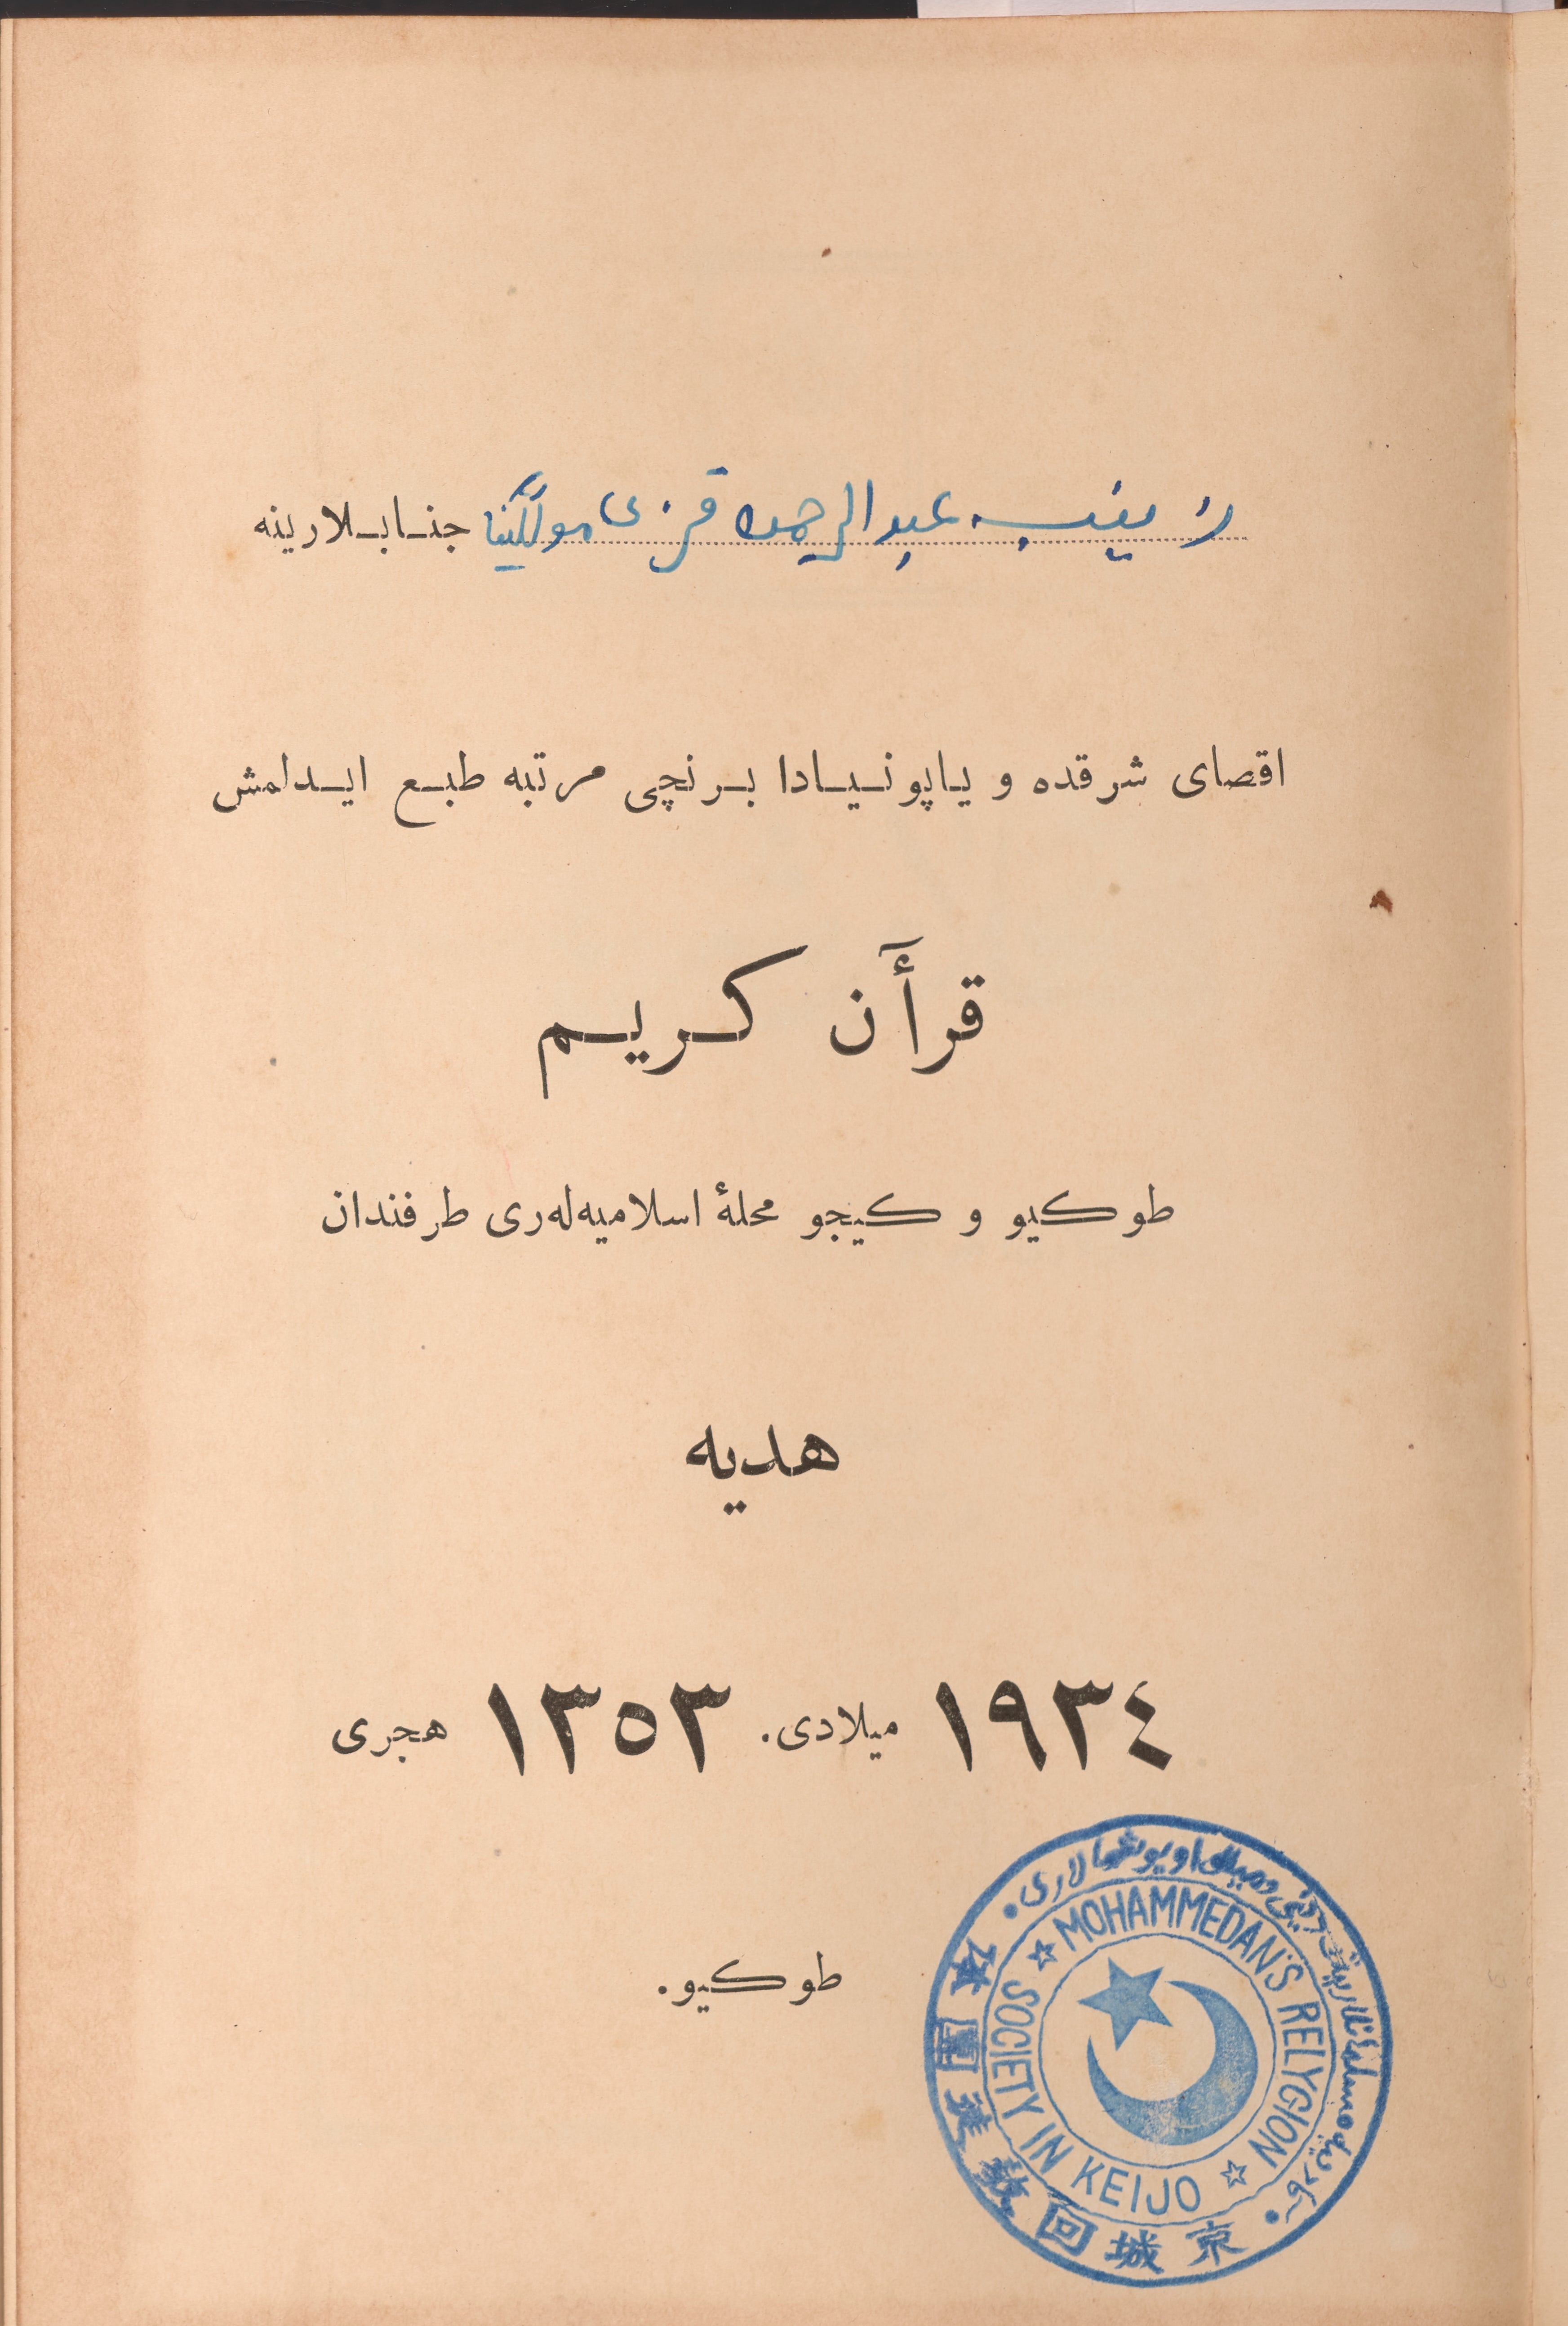 An inside page of the book, which is yellowed with age, shows Arabic text and a blue circular stamp with more text and some logos or symbols.